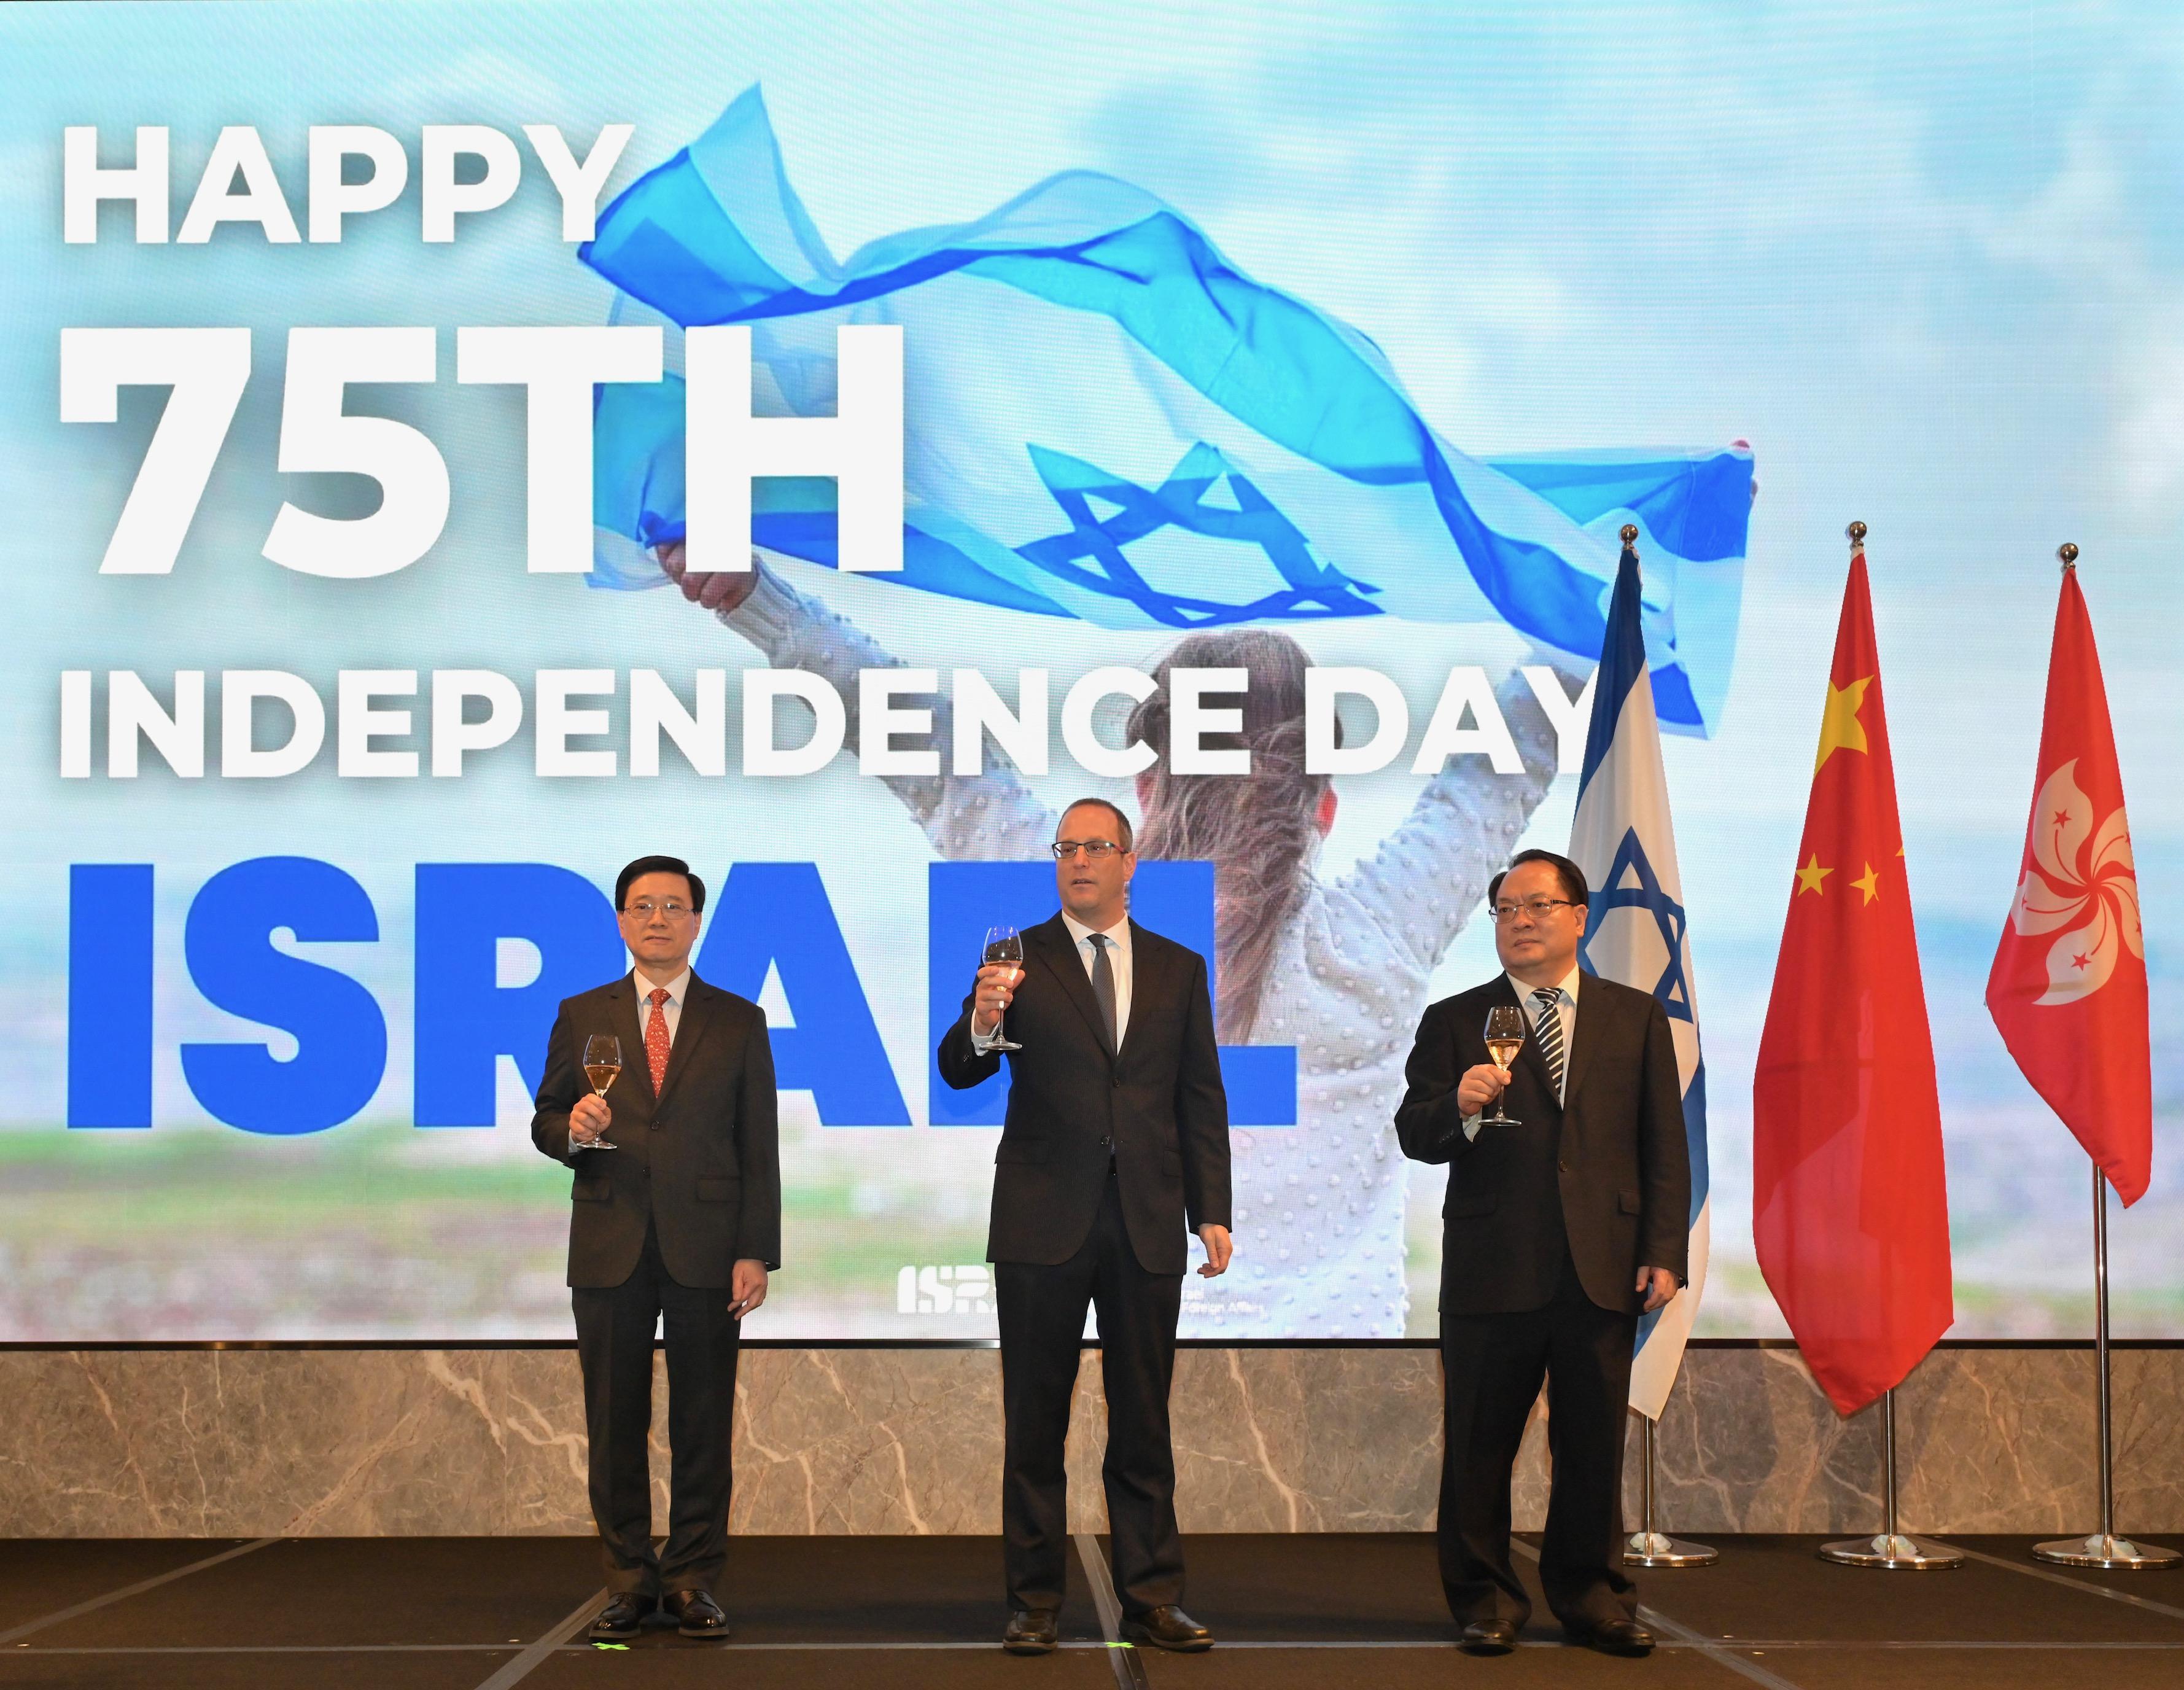 The Chief Executive, Mr John Lee, attended the reception in celebration of the 75th Independence Day of the State of Israel today (June 20). Photo shows (from left) Mr Lee; the Consul General of the State of Israel in Hong Kong, Mr Amir Laty; and Deputy Commissioner of the Office of the Commissioner of the Ministry of Foreign Affairs of the People's Republic of China in the Hong Kong Special Administrative Region Mr Pan Yundong, at the reception.